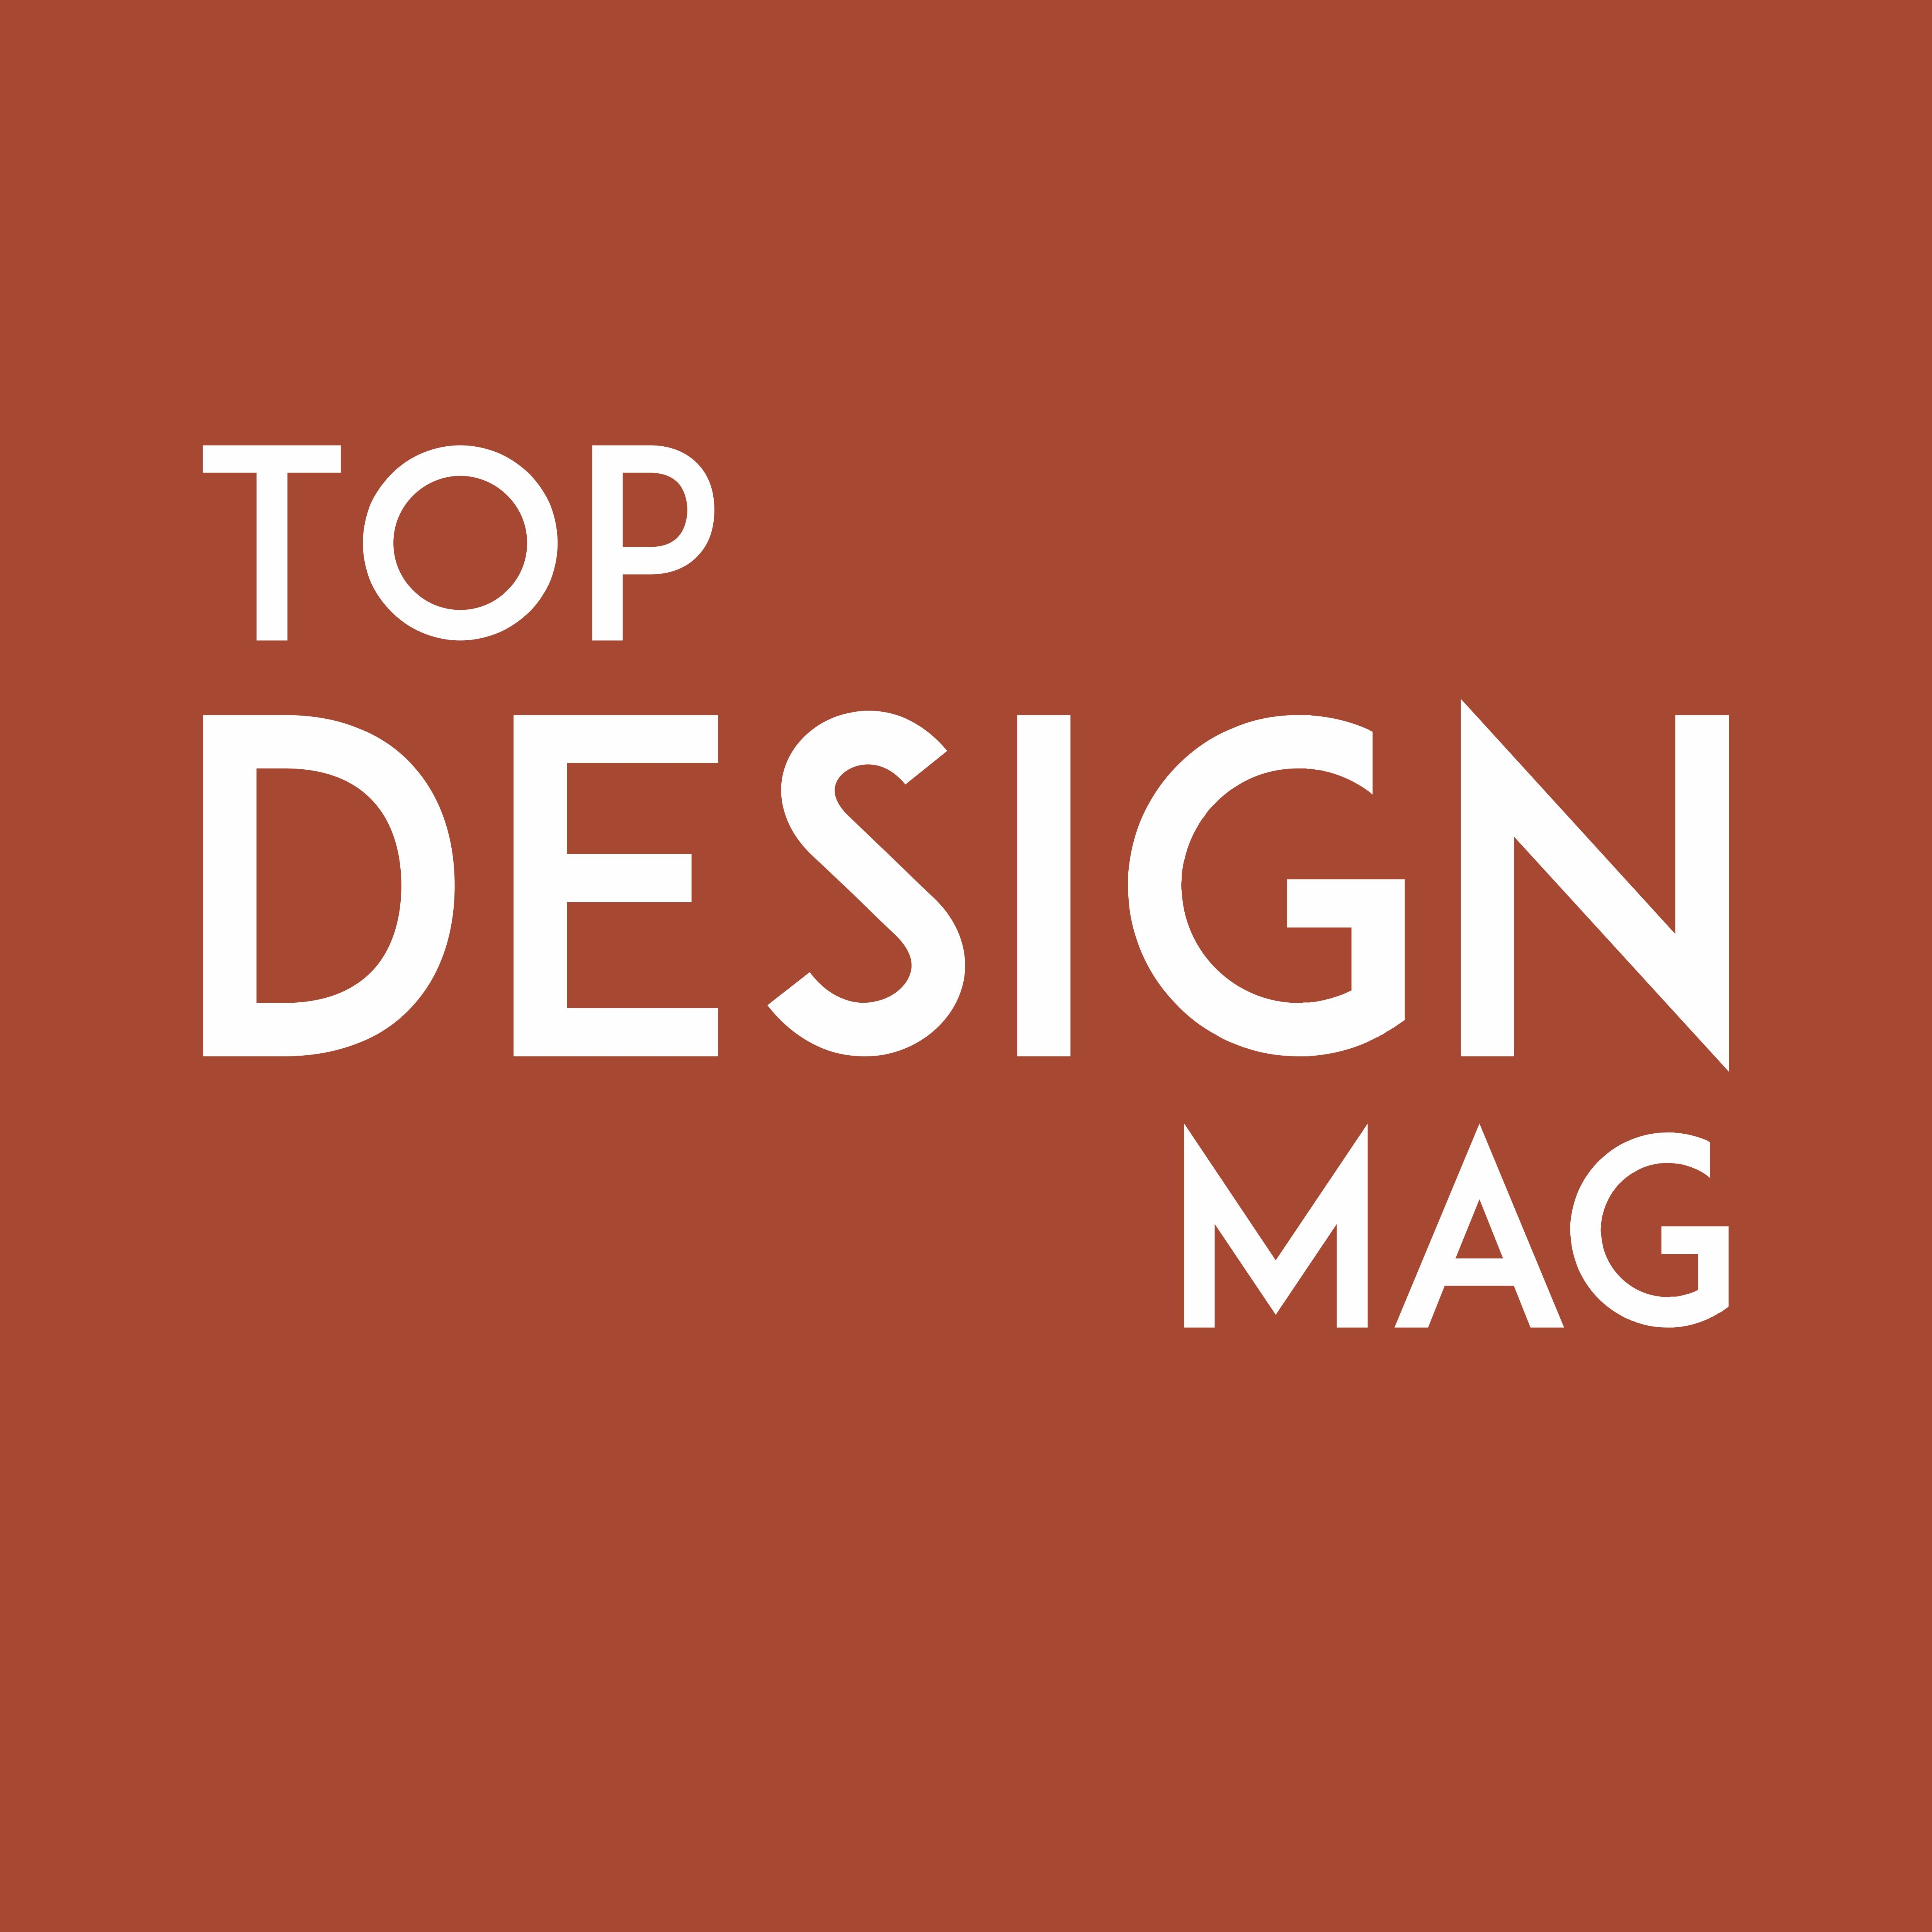 TopDesign Mag